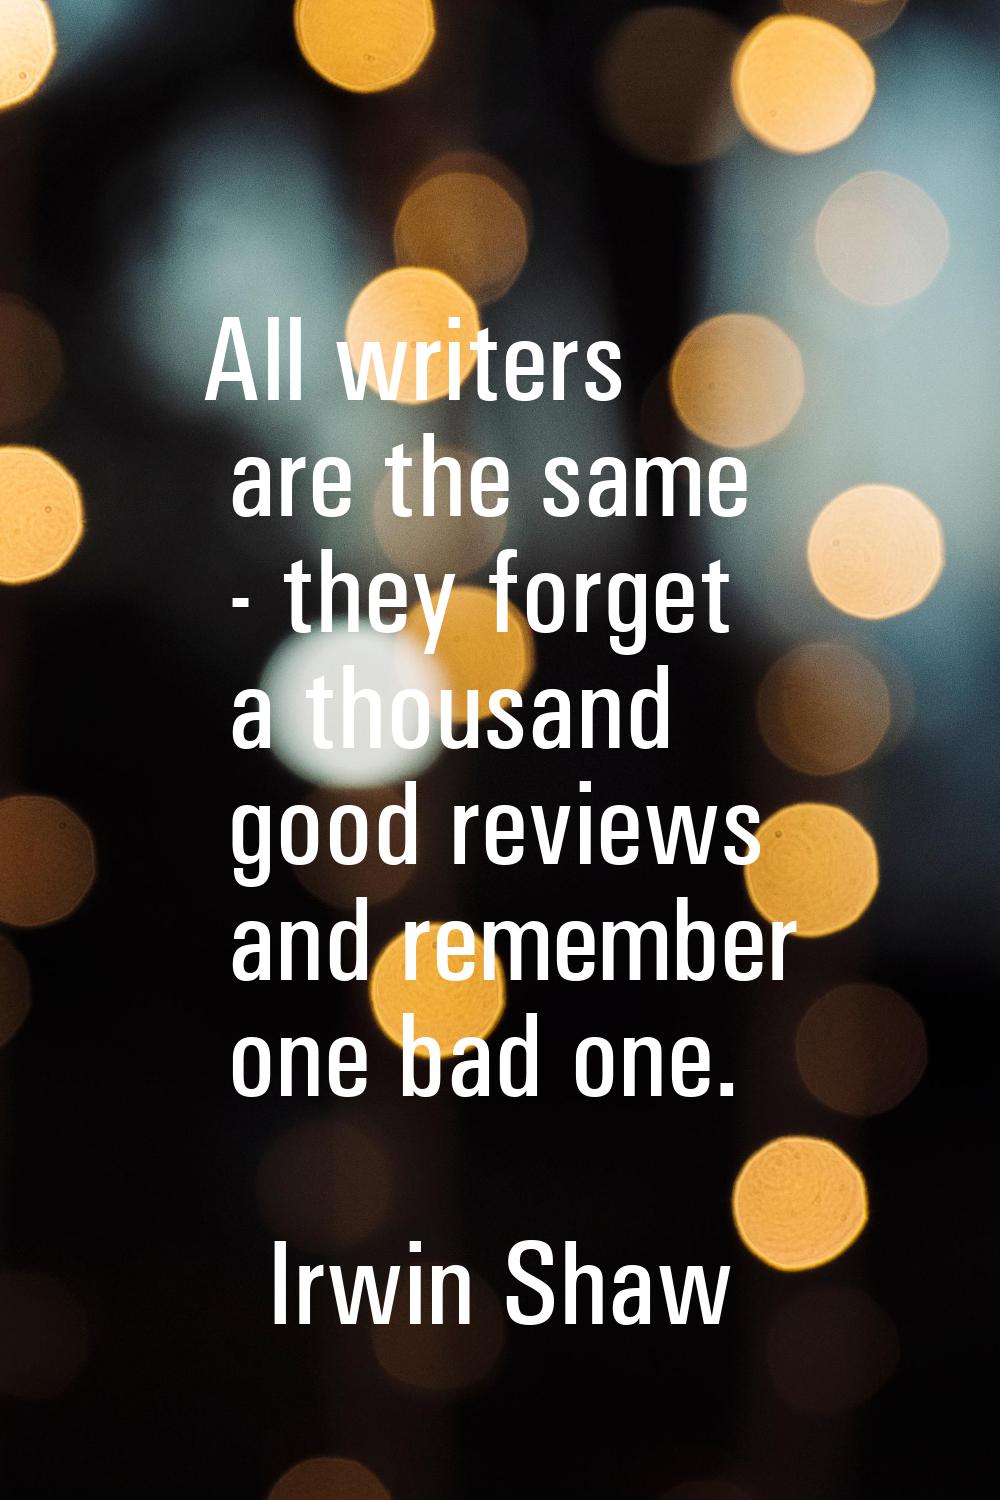 All writers are the same - they forget a thousand good reviews and remember one bad one.